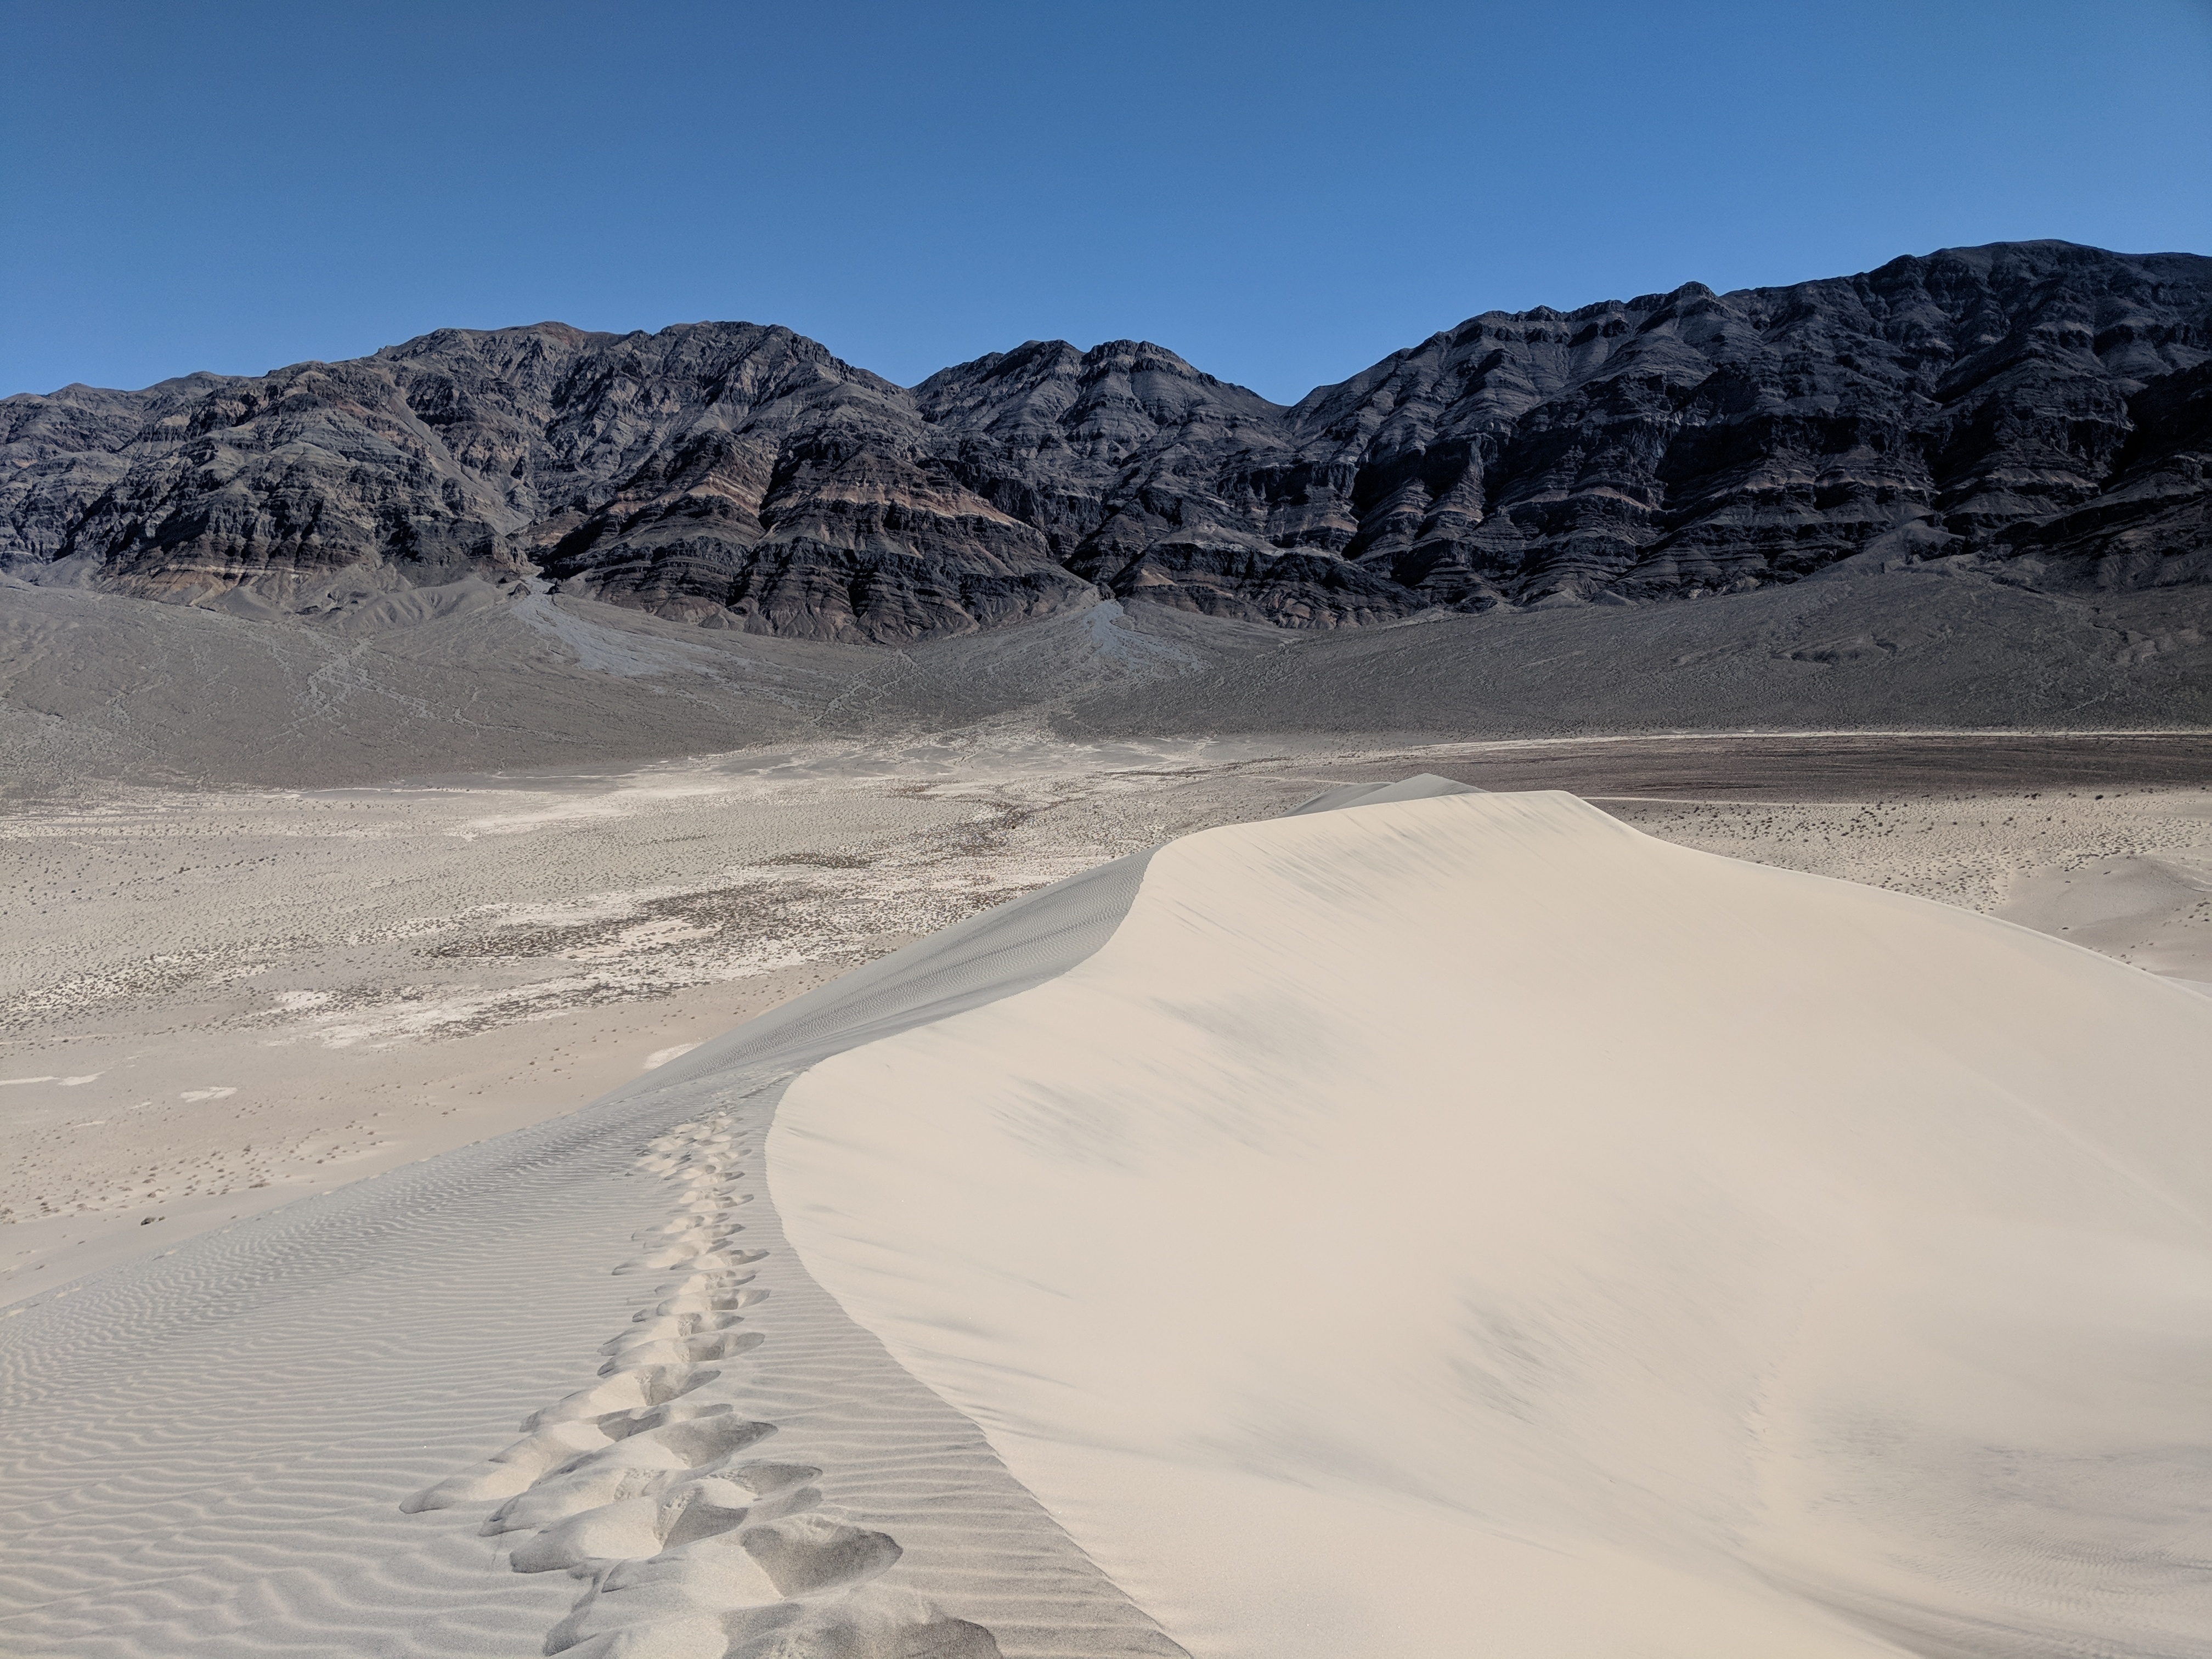 Footprints on white sand dunes in front of dark mountains.